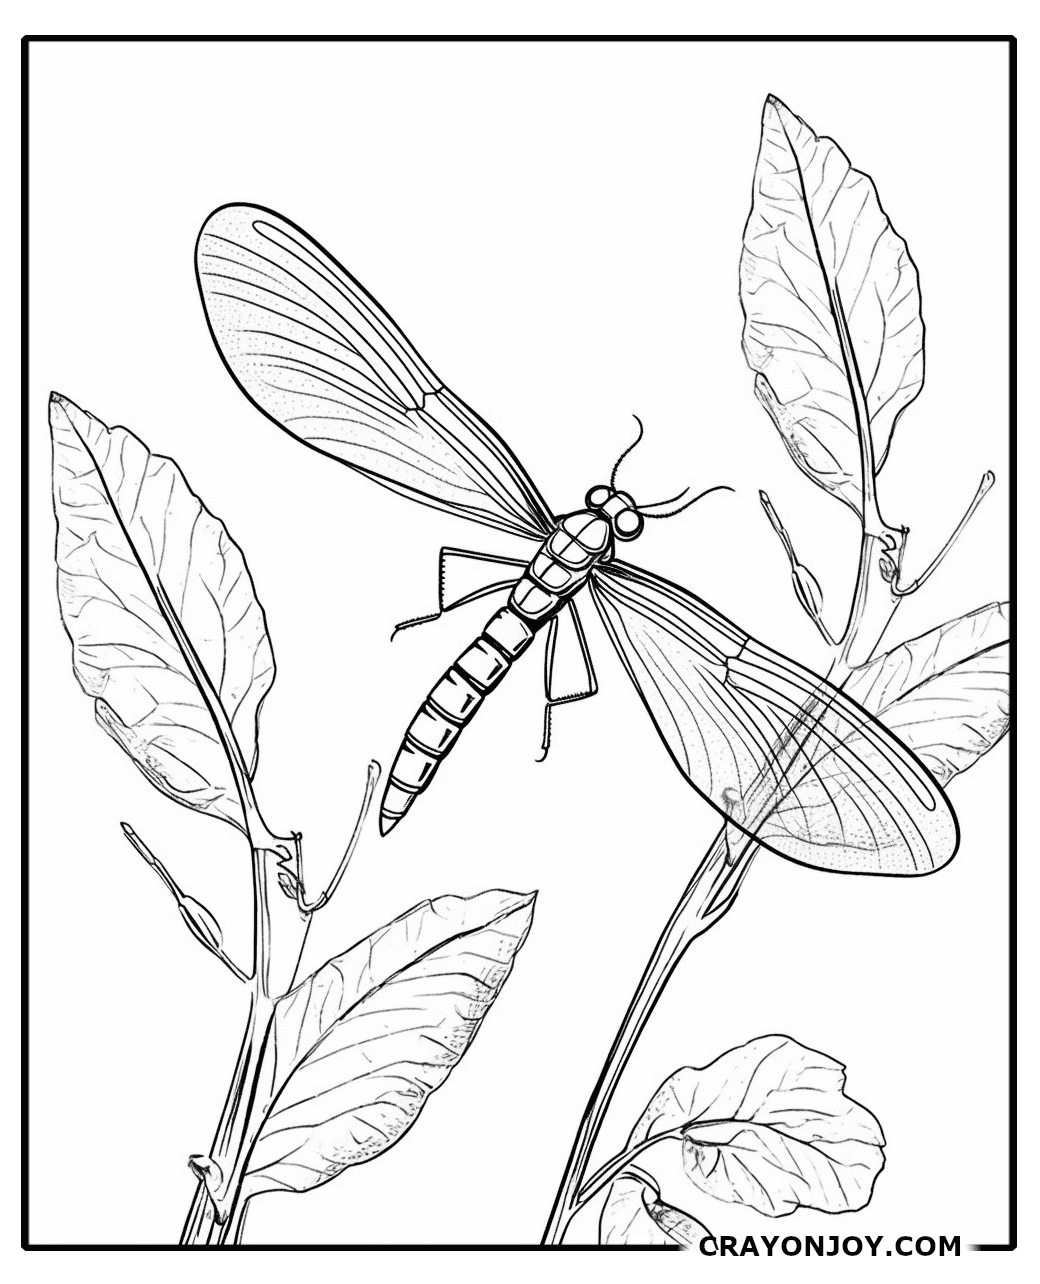 Mayfly Coloring Pages: Free Printable Sheets for Kids and Adults